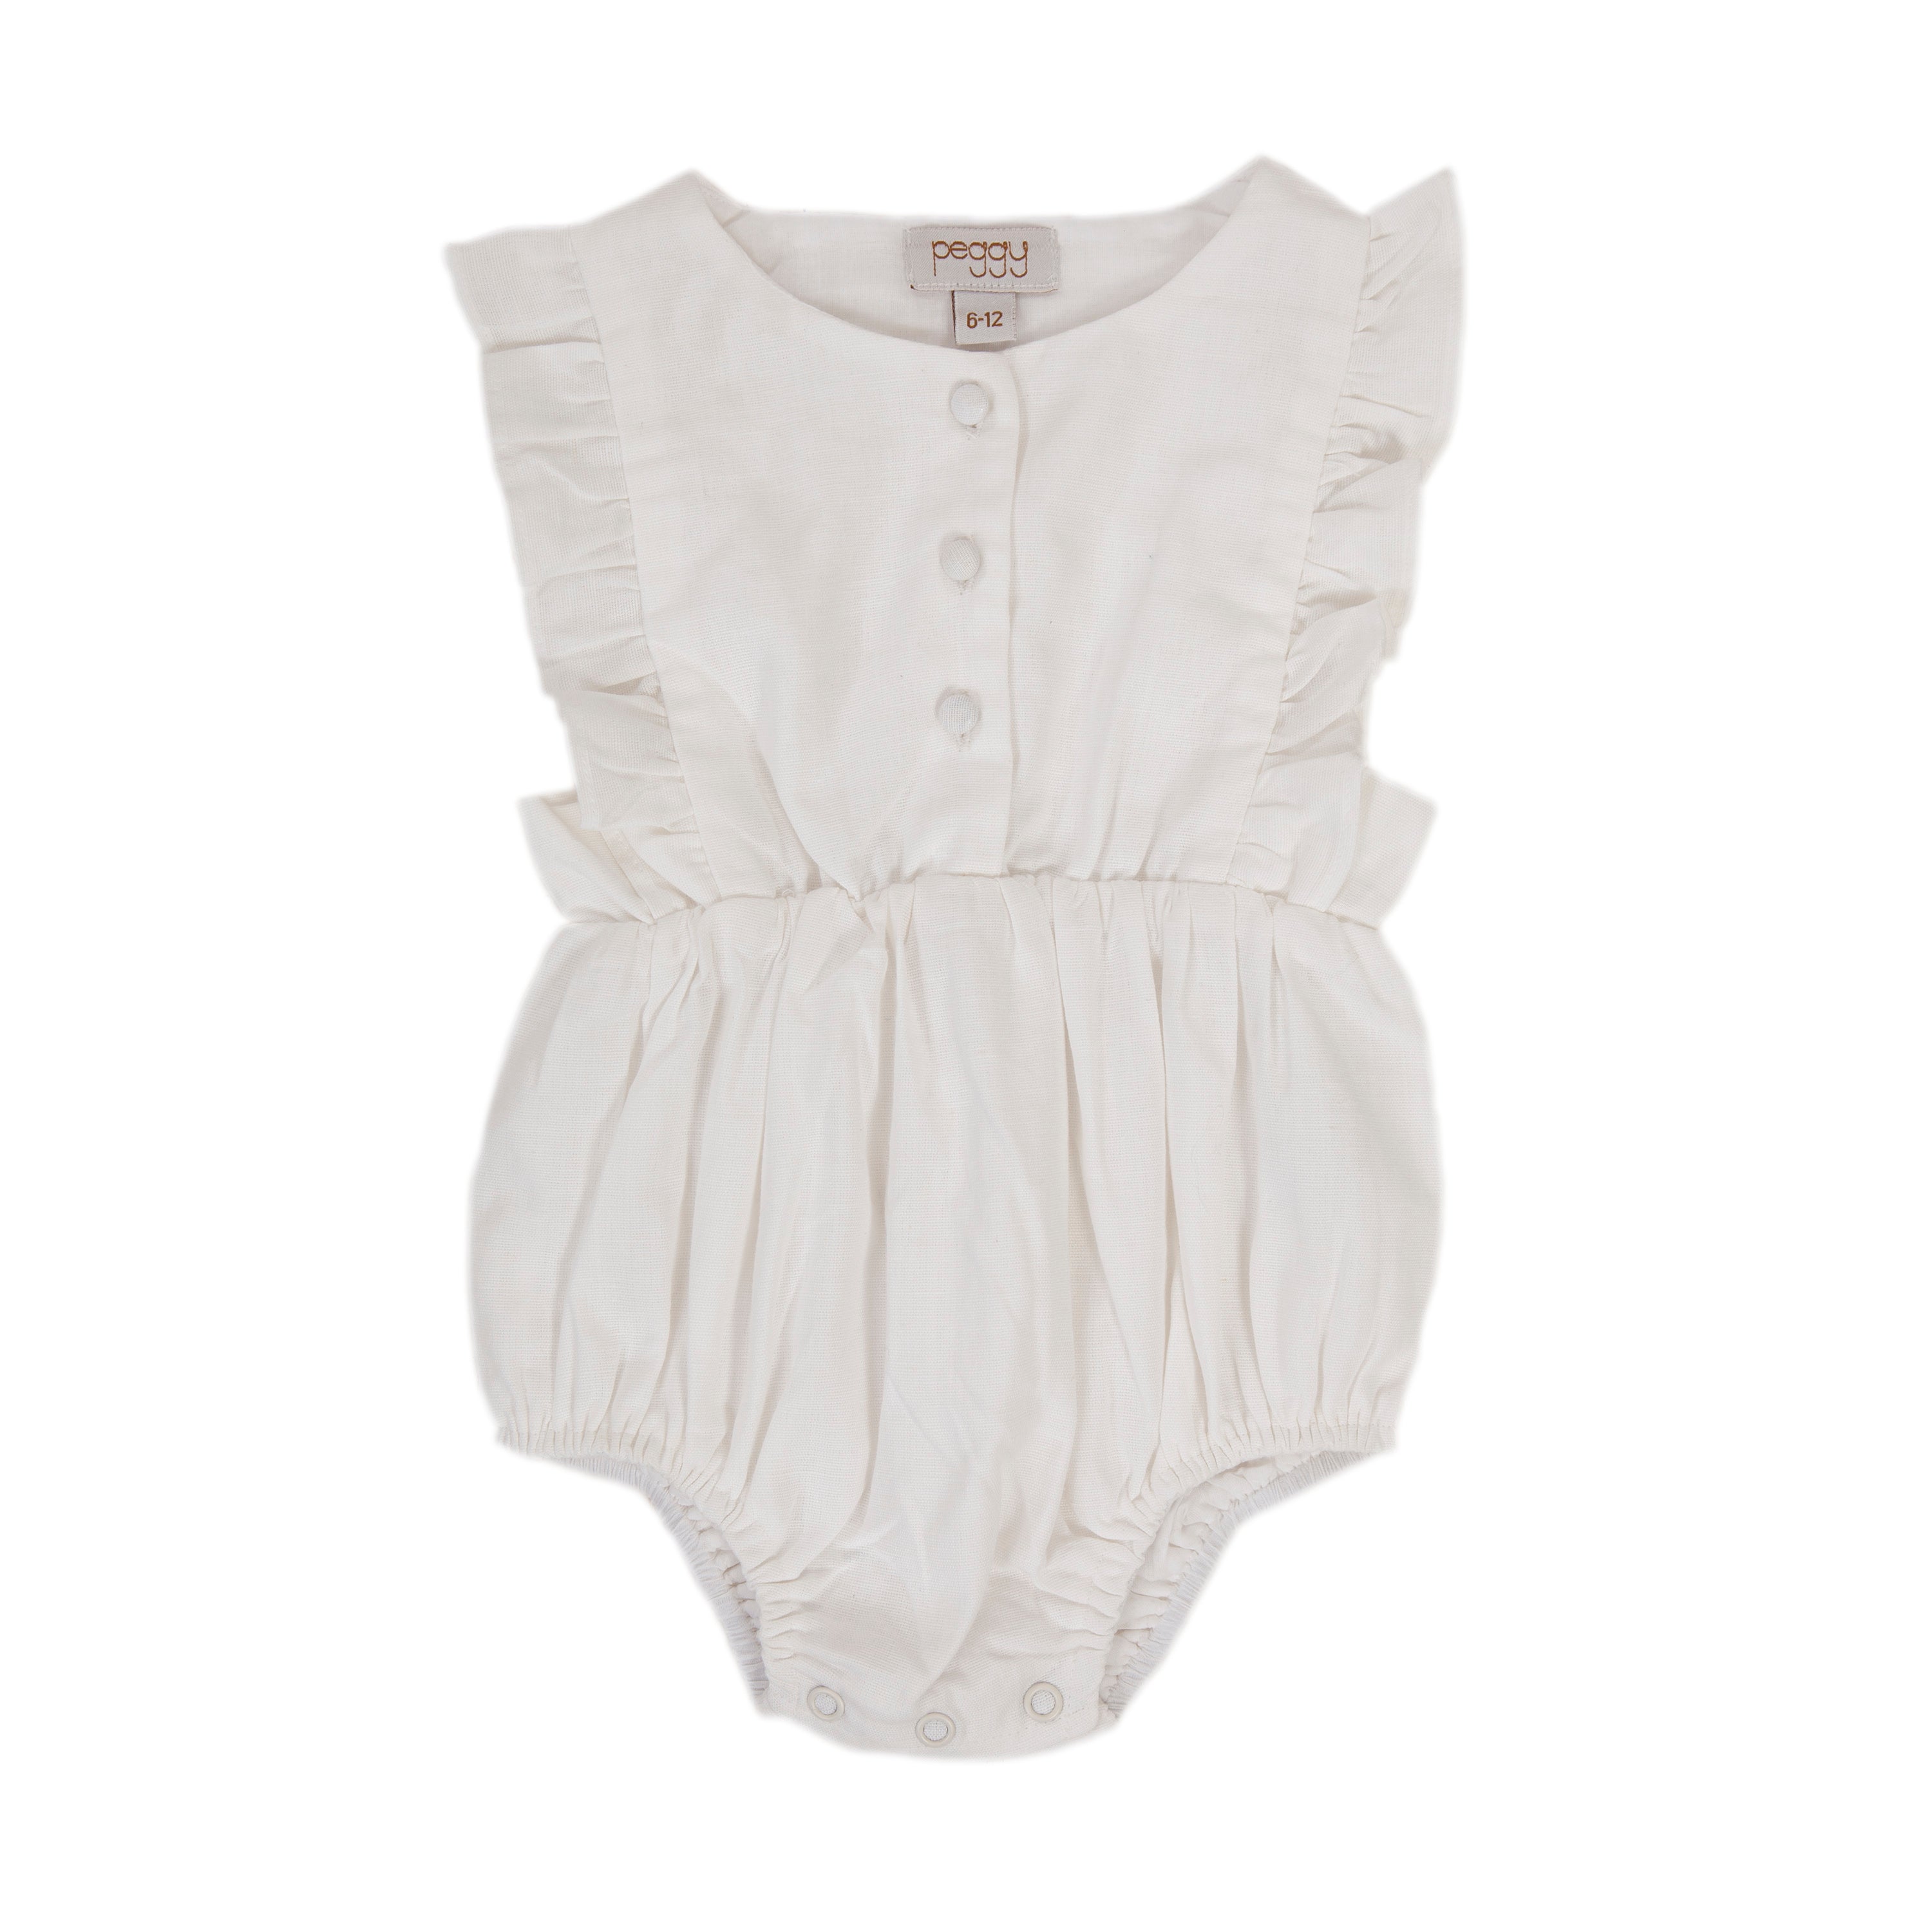 Peggy - August Playsuit (White)